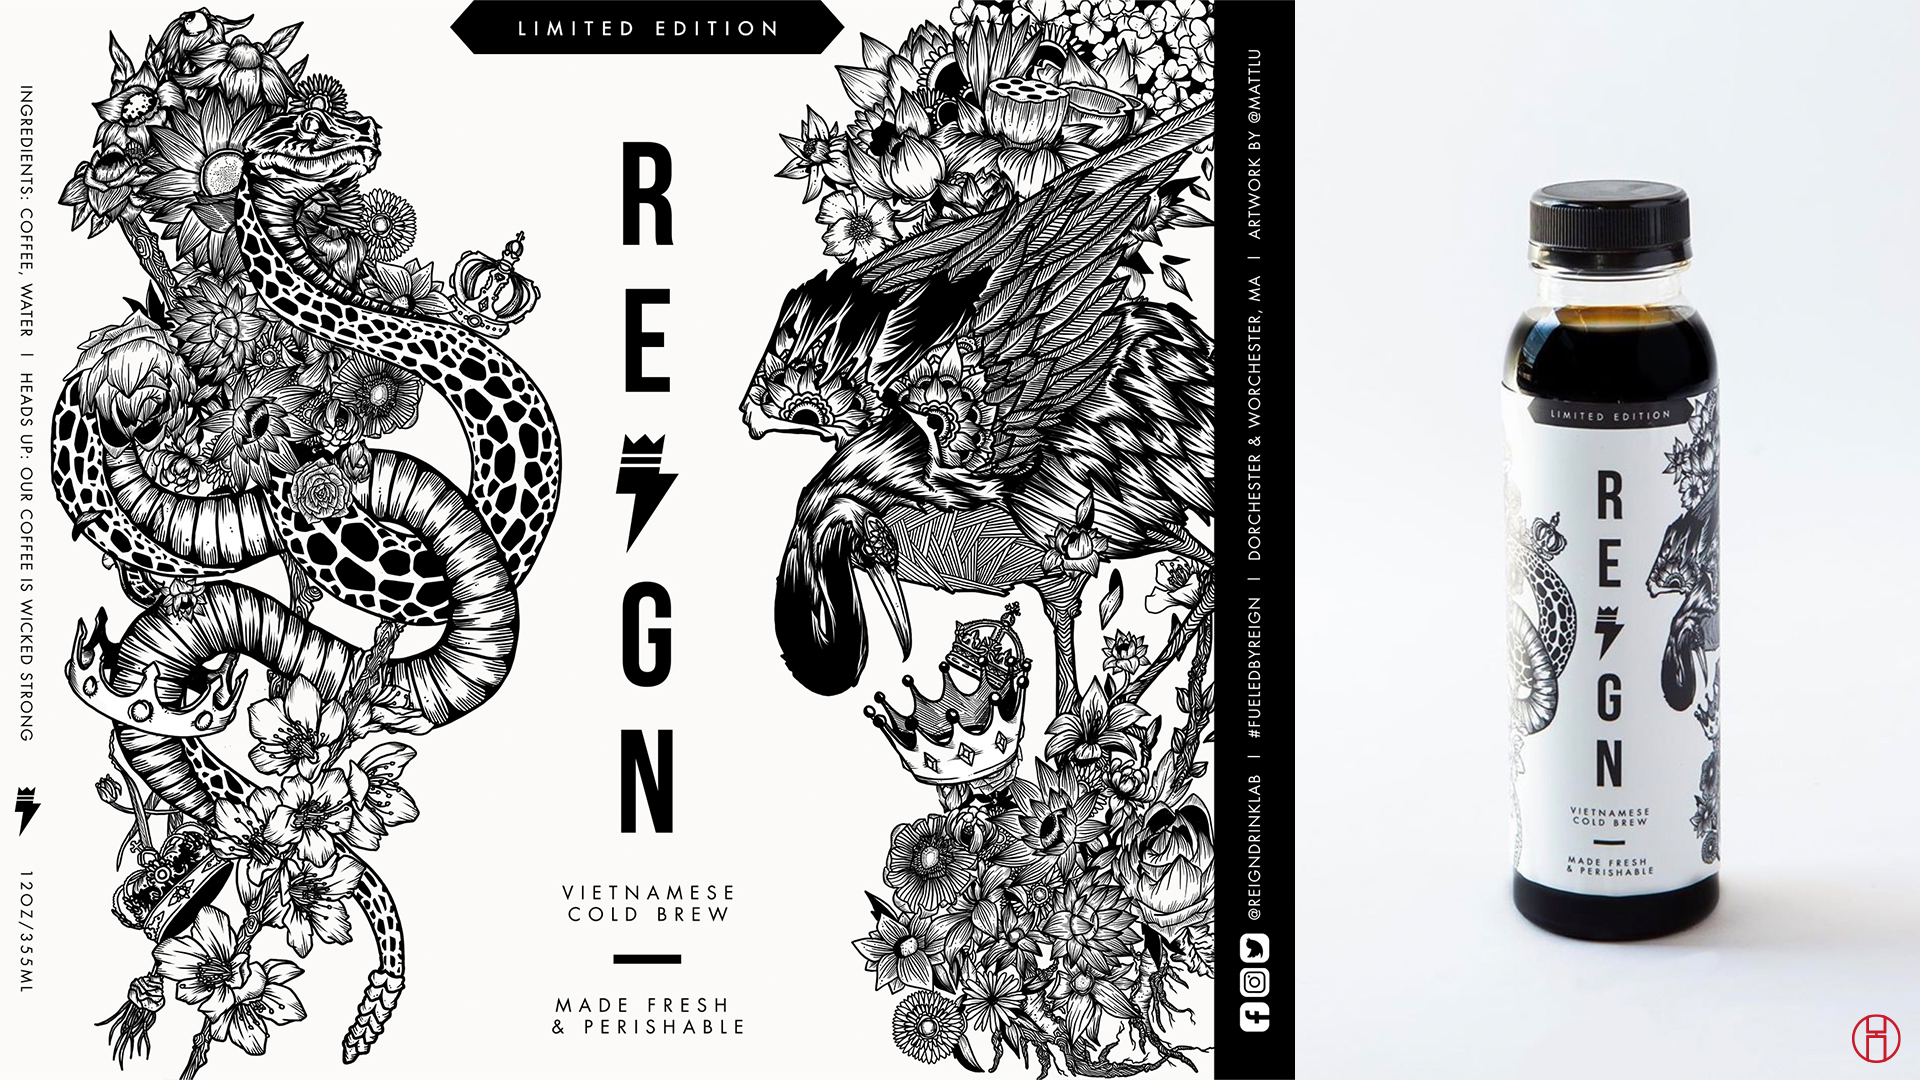 featured image two:Reign Drink Lab: Cold Brew Label